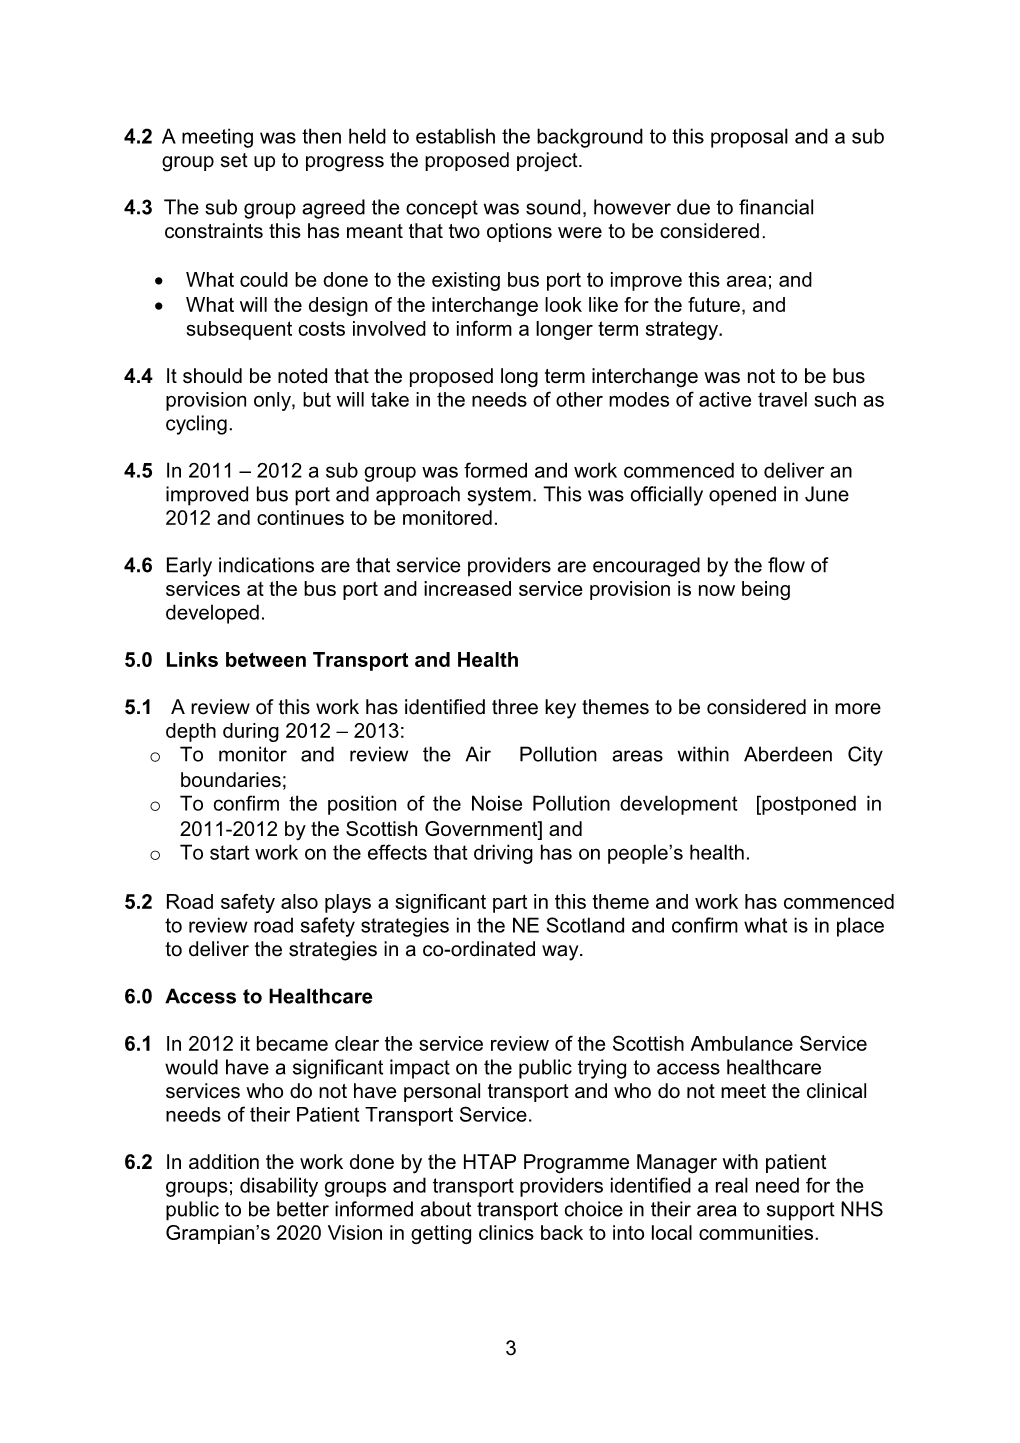 Item 9 for 2 Oct 2012 Health and Transport Action Plan